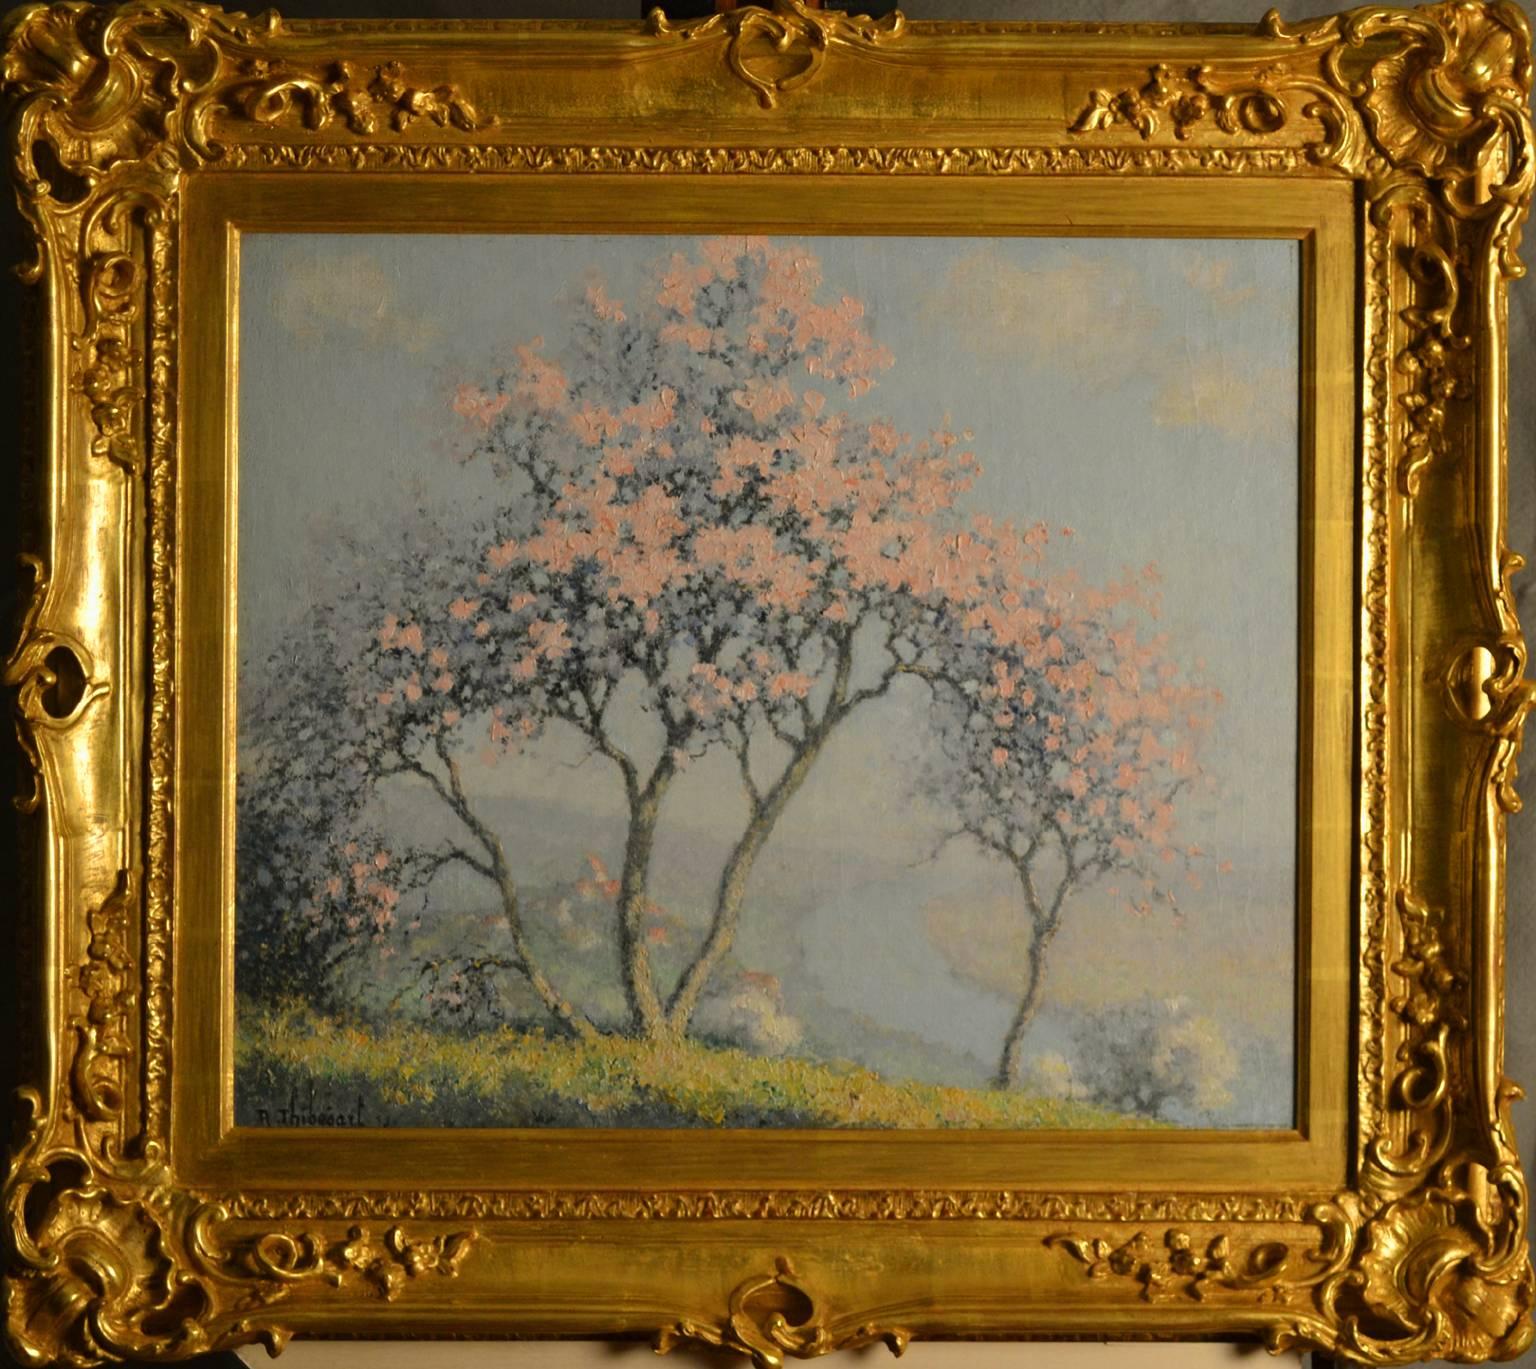 Unframed size is 17 7/8 x 21 1/2 inches
in 22K new hand gilded frame.

Son of an affluent family, Raymond Thibesart was born in Troyes (France), on May 2, 1874. Soon after his parents moved their residence to the city of Enghien, in close